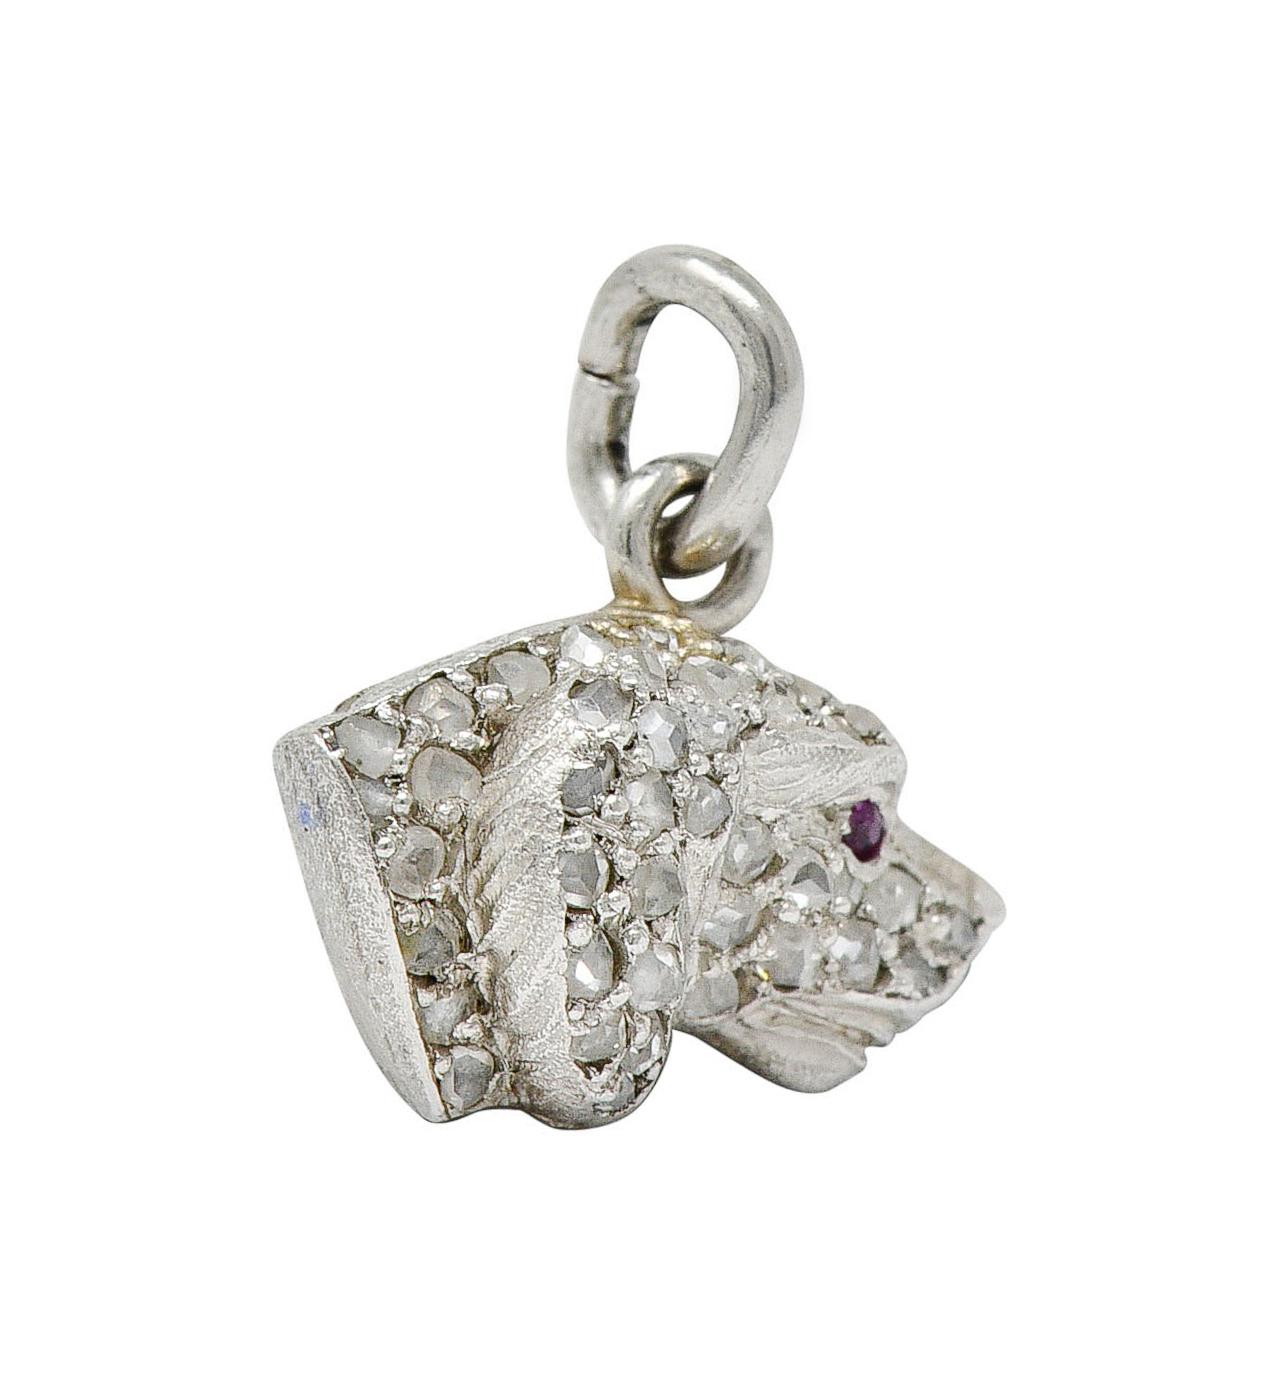 Charm is designed as a profile of a dog with a ruby eye accent

Pavè set throughout by rose cut diamonds weighing approximately 0.50 carat

Quality consistent with age

Tested as platinum

Circa: 1920s

Measures: 1/2 x 1/2 inch (including jump ring